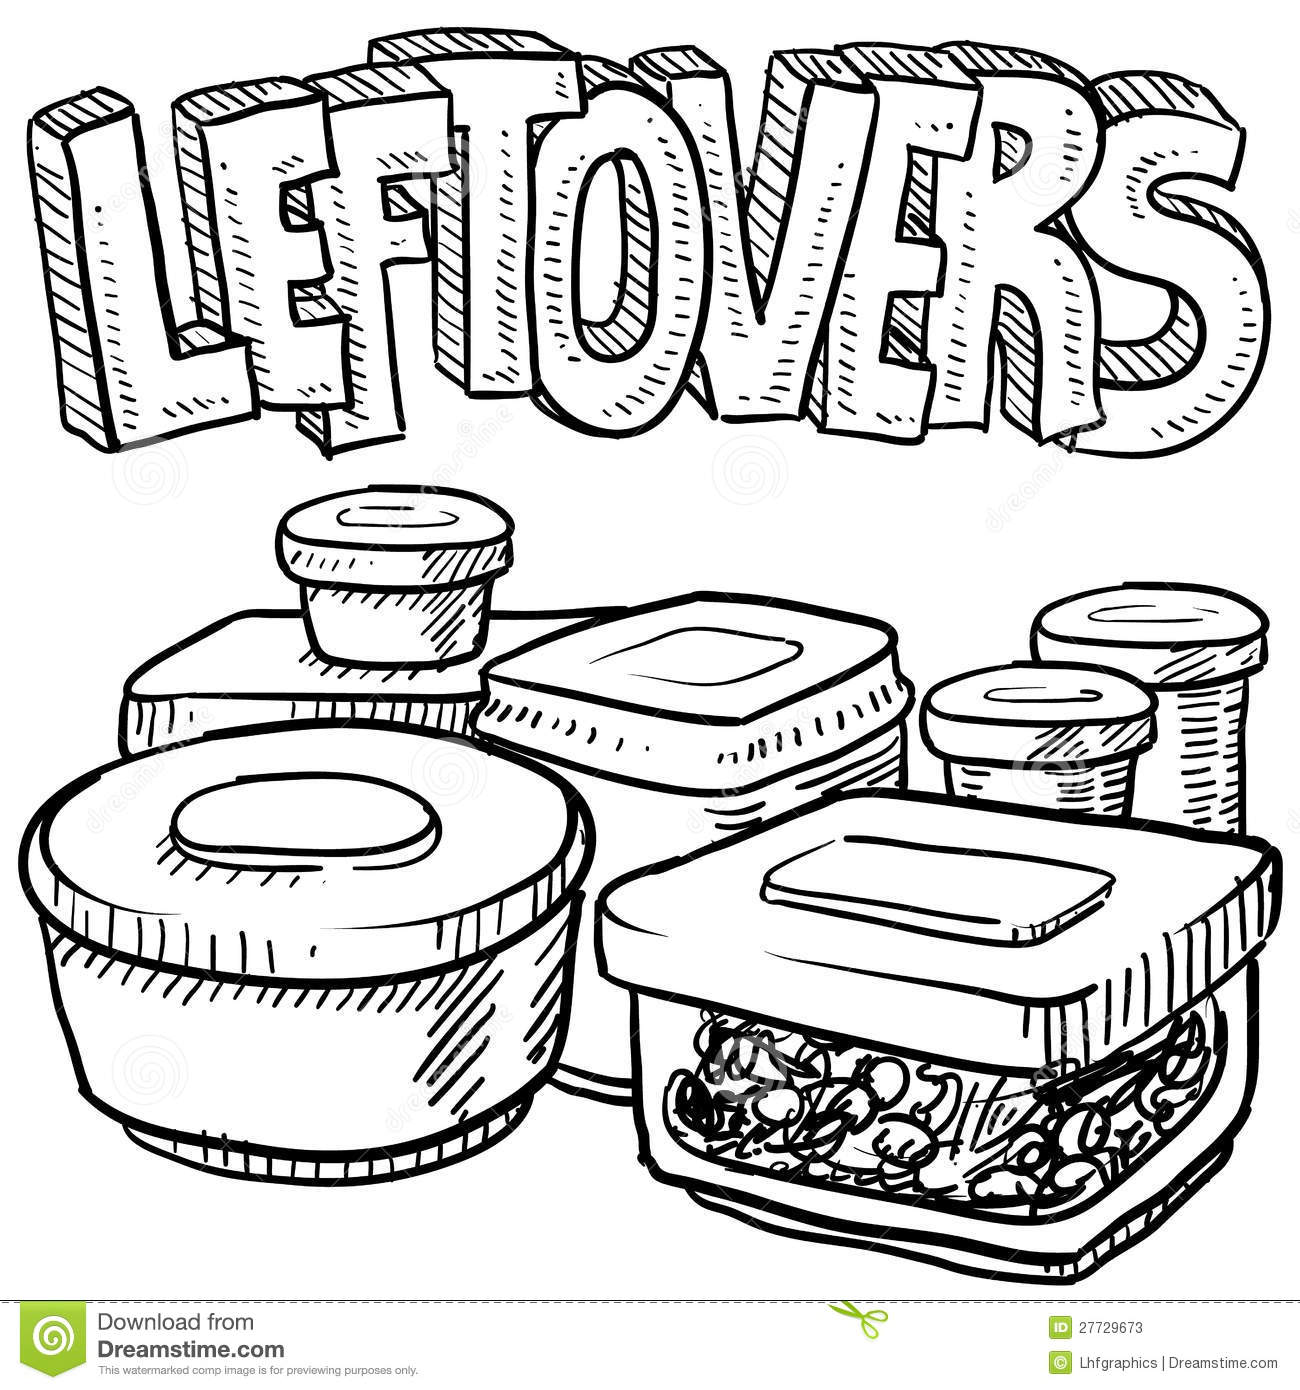 Food in a leftover bag clipart.